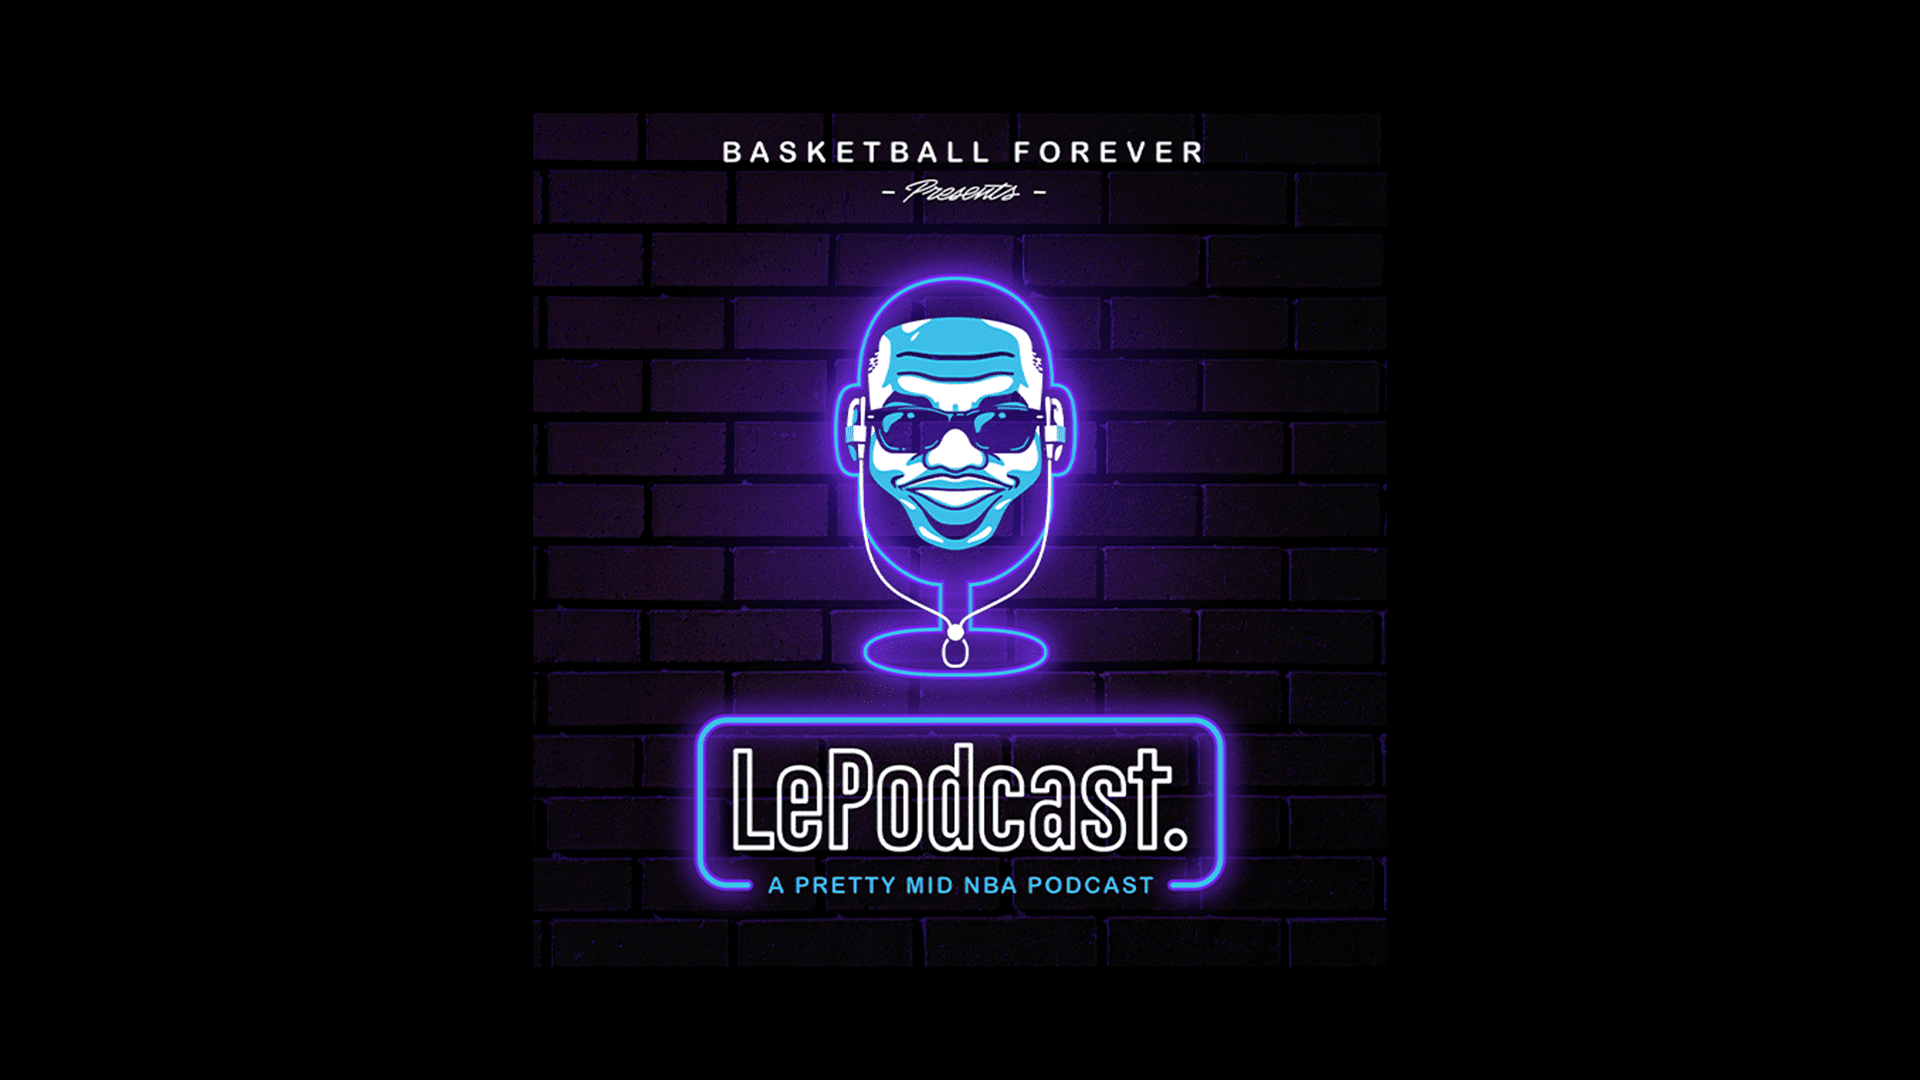 LePodcast Episode 79: The Miami Heat are Toast